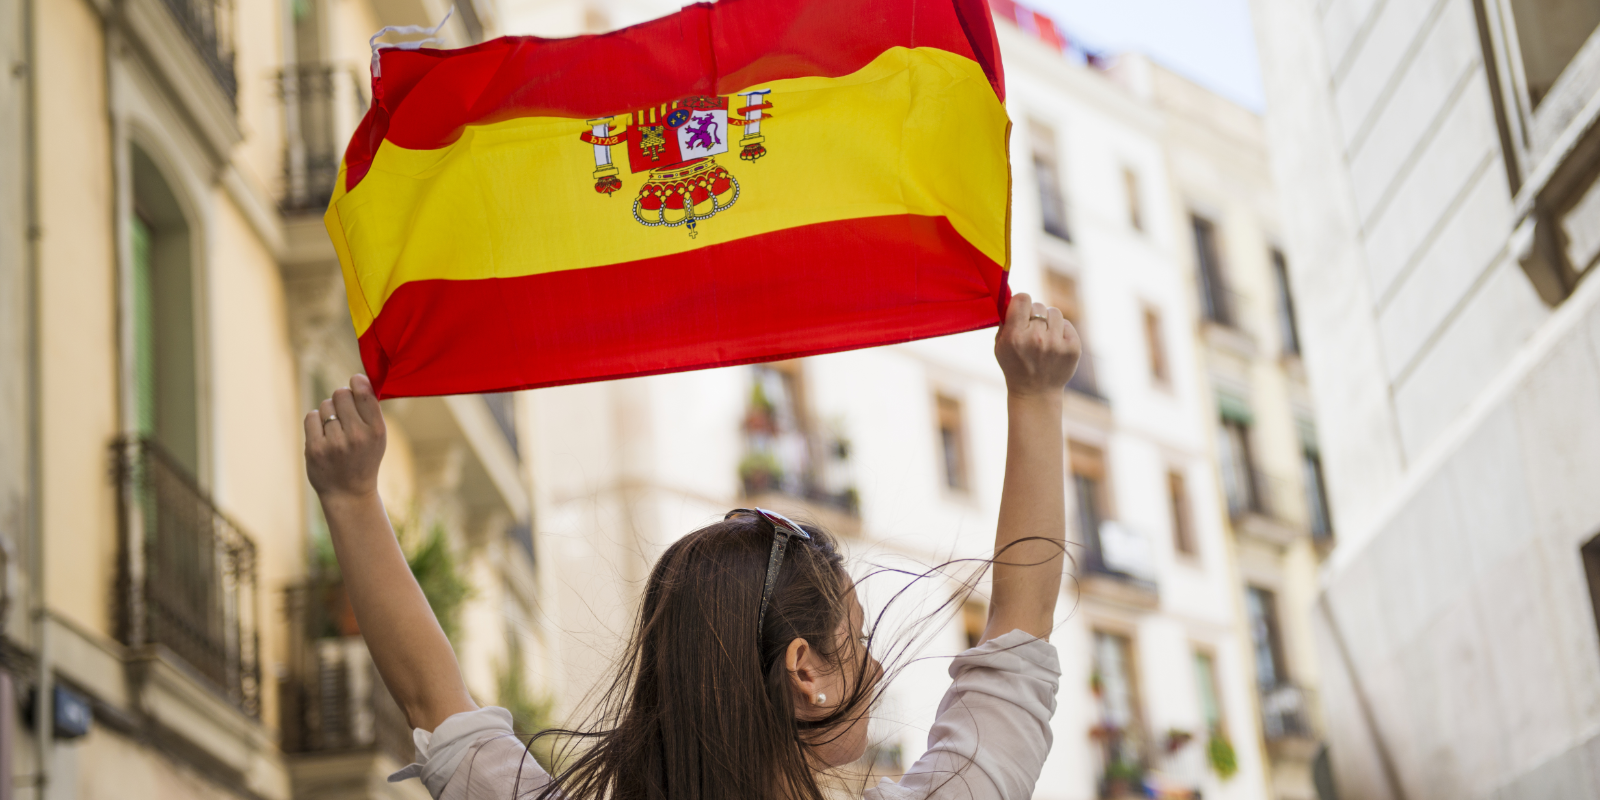 A person holding up the Spanish flag high on a city street.